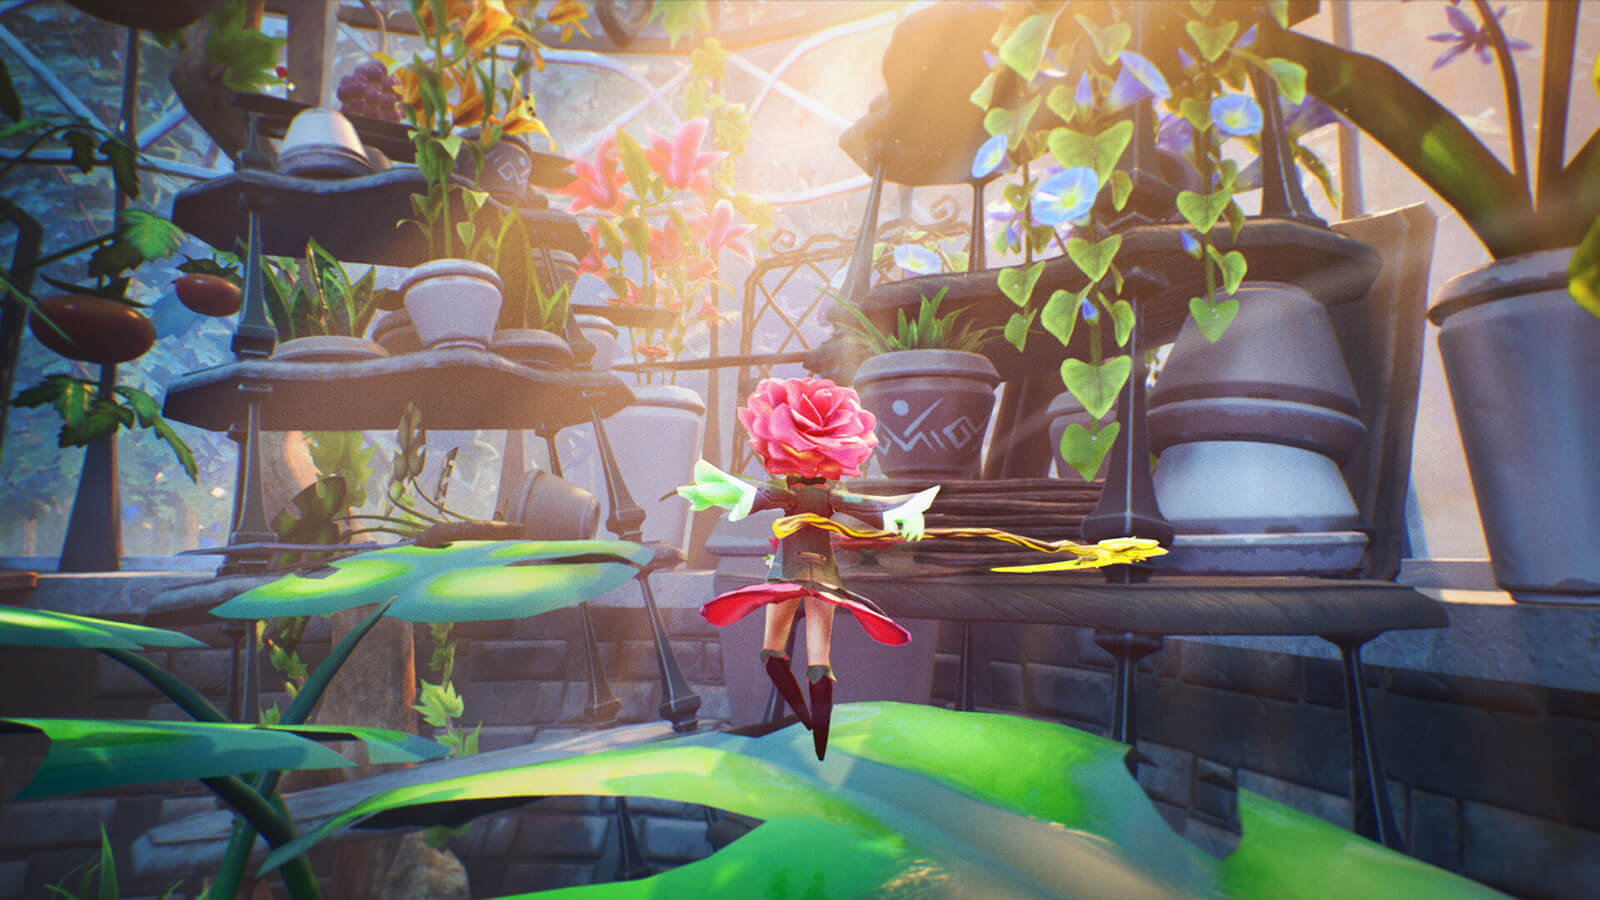 A tiny rose character jumps gracefully on top of large leaves.